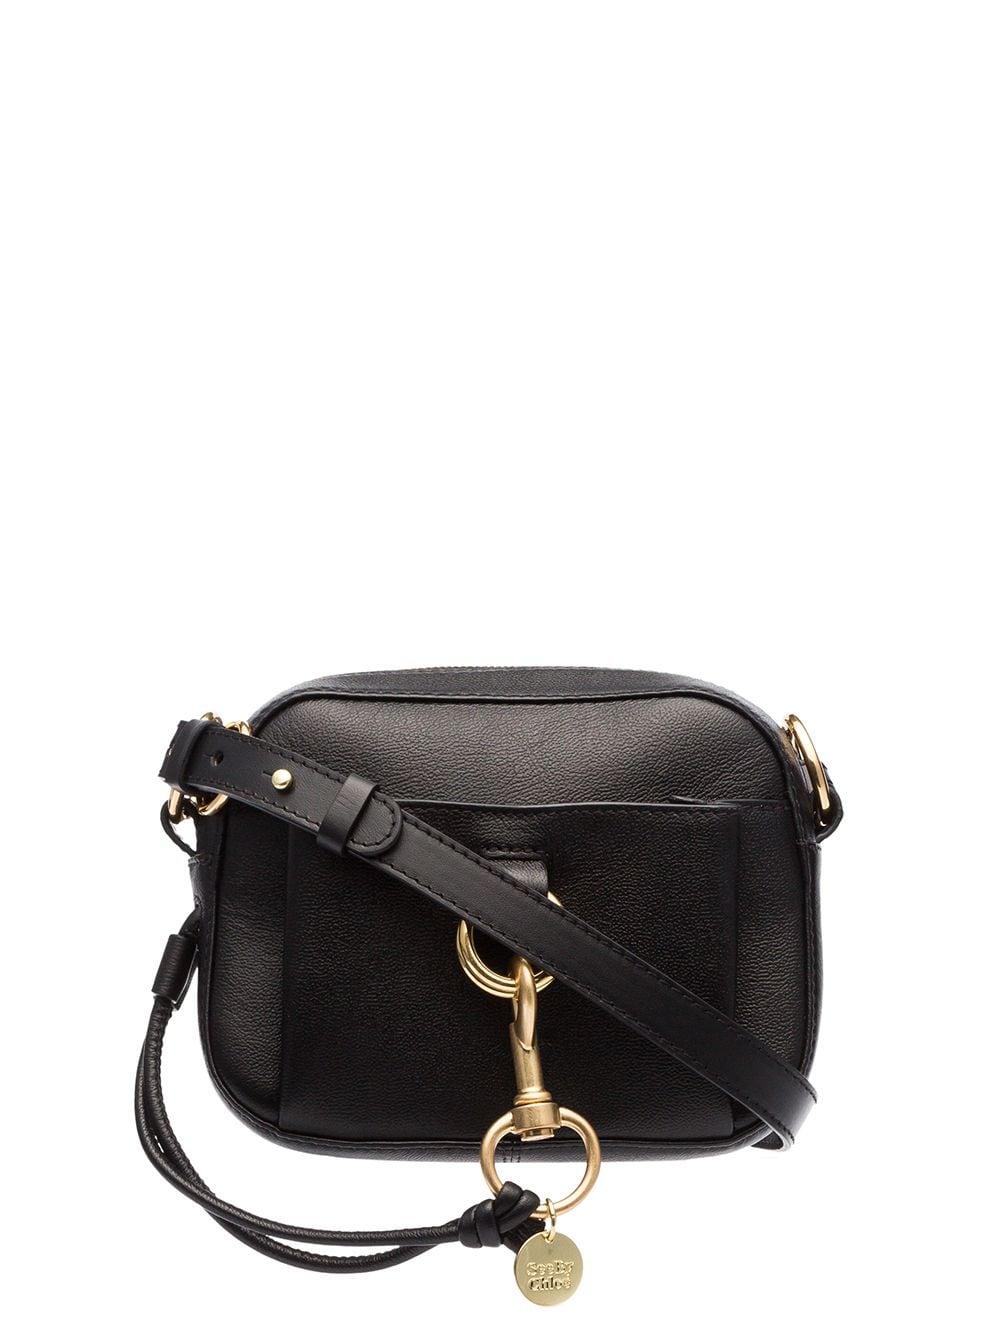 See By Chloé Leather Clasp Detail Crossbody Bag in Black - Lyst